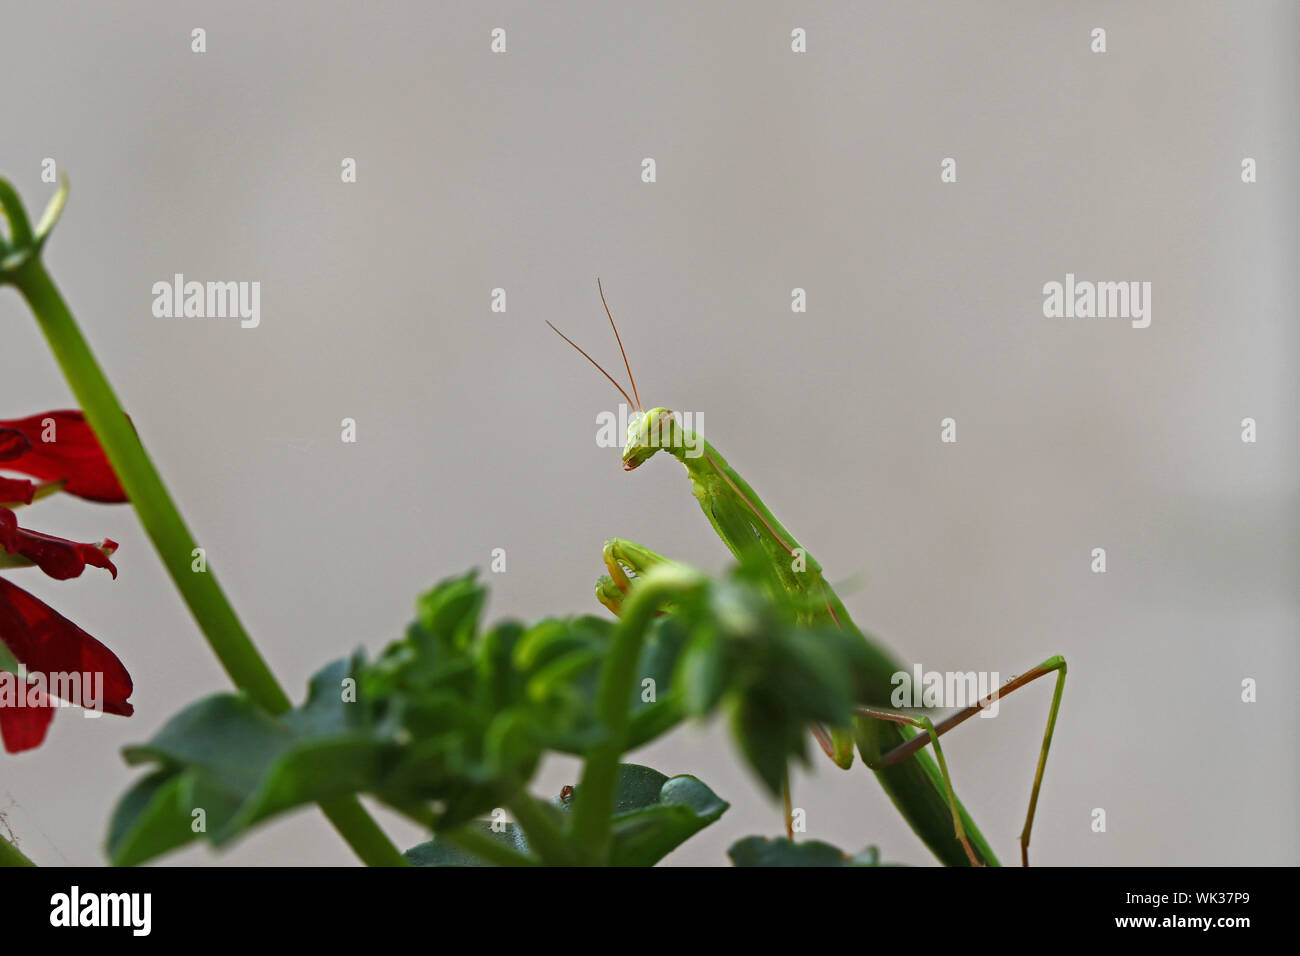 green European praying mantis or mantid Latin mantis religiosa state symbol of Connecticut at rest on a geranium plant in summer in Italy Stock Photo